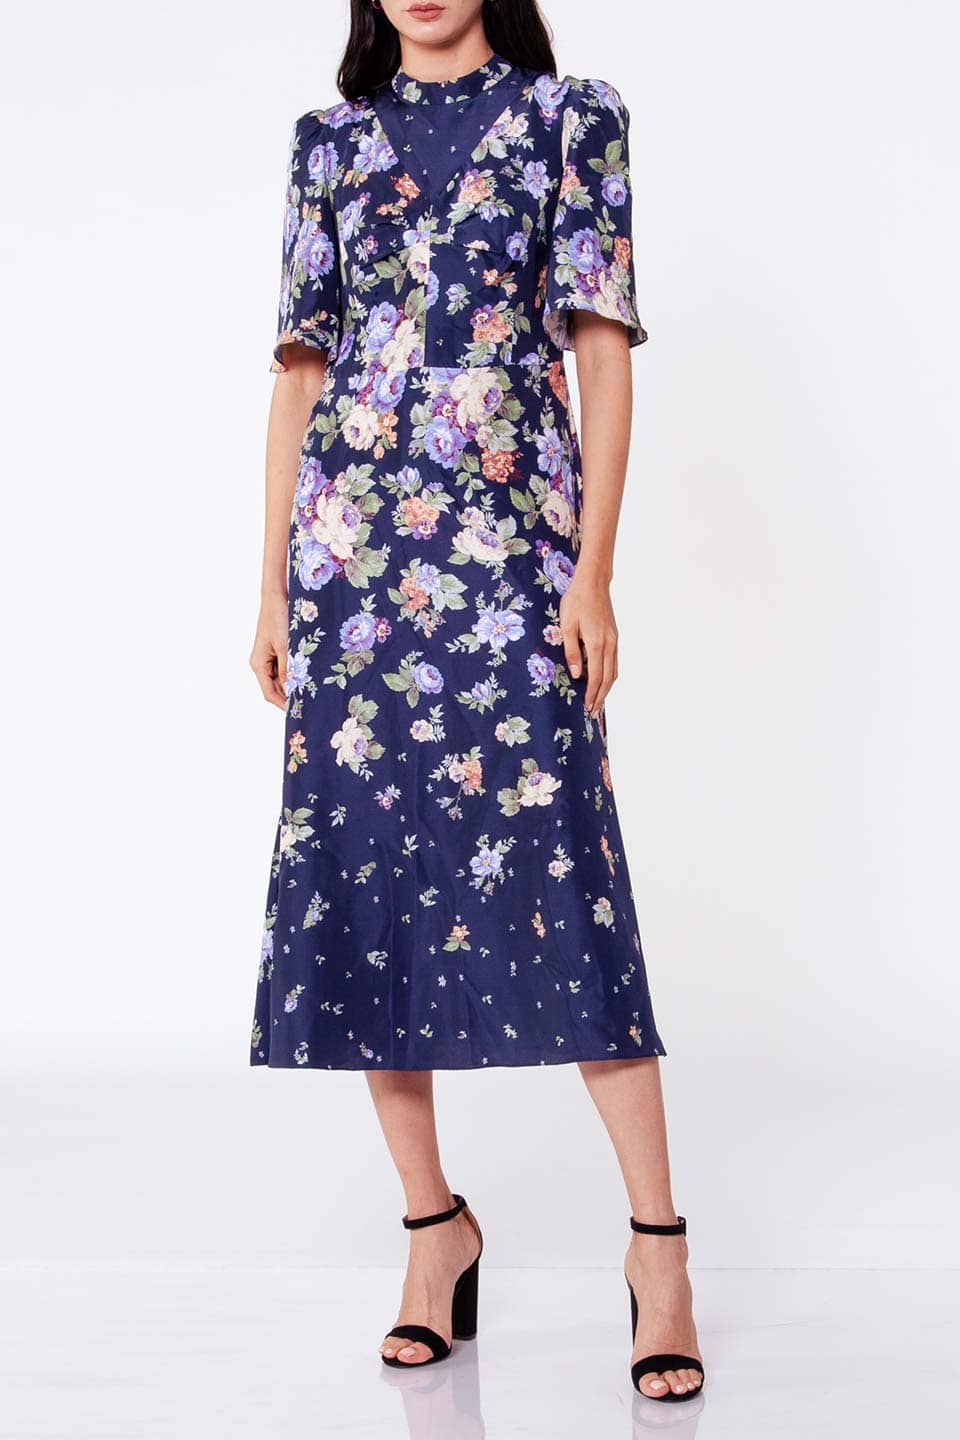 Thumbnail for Product gallery 1, Online shopping midi dress from fashion designer, blue color with floral print